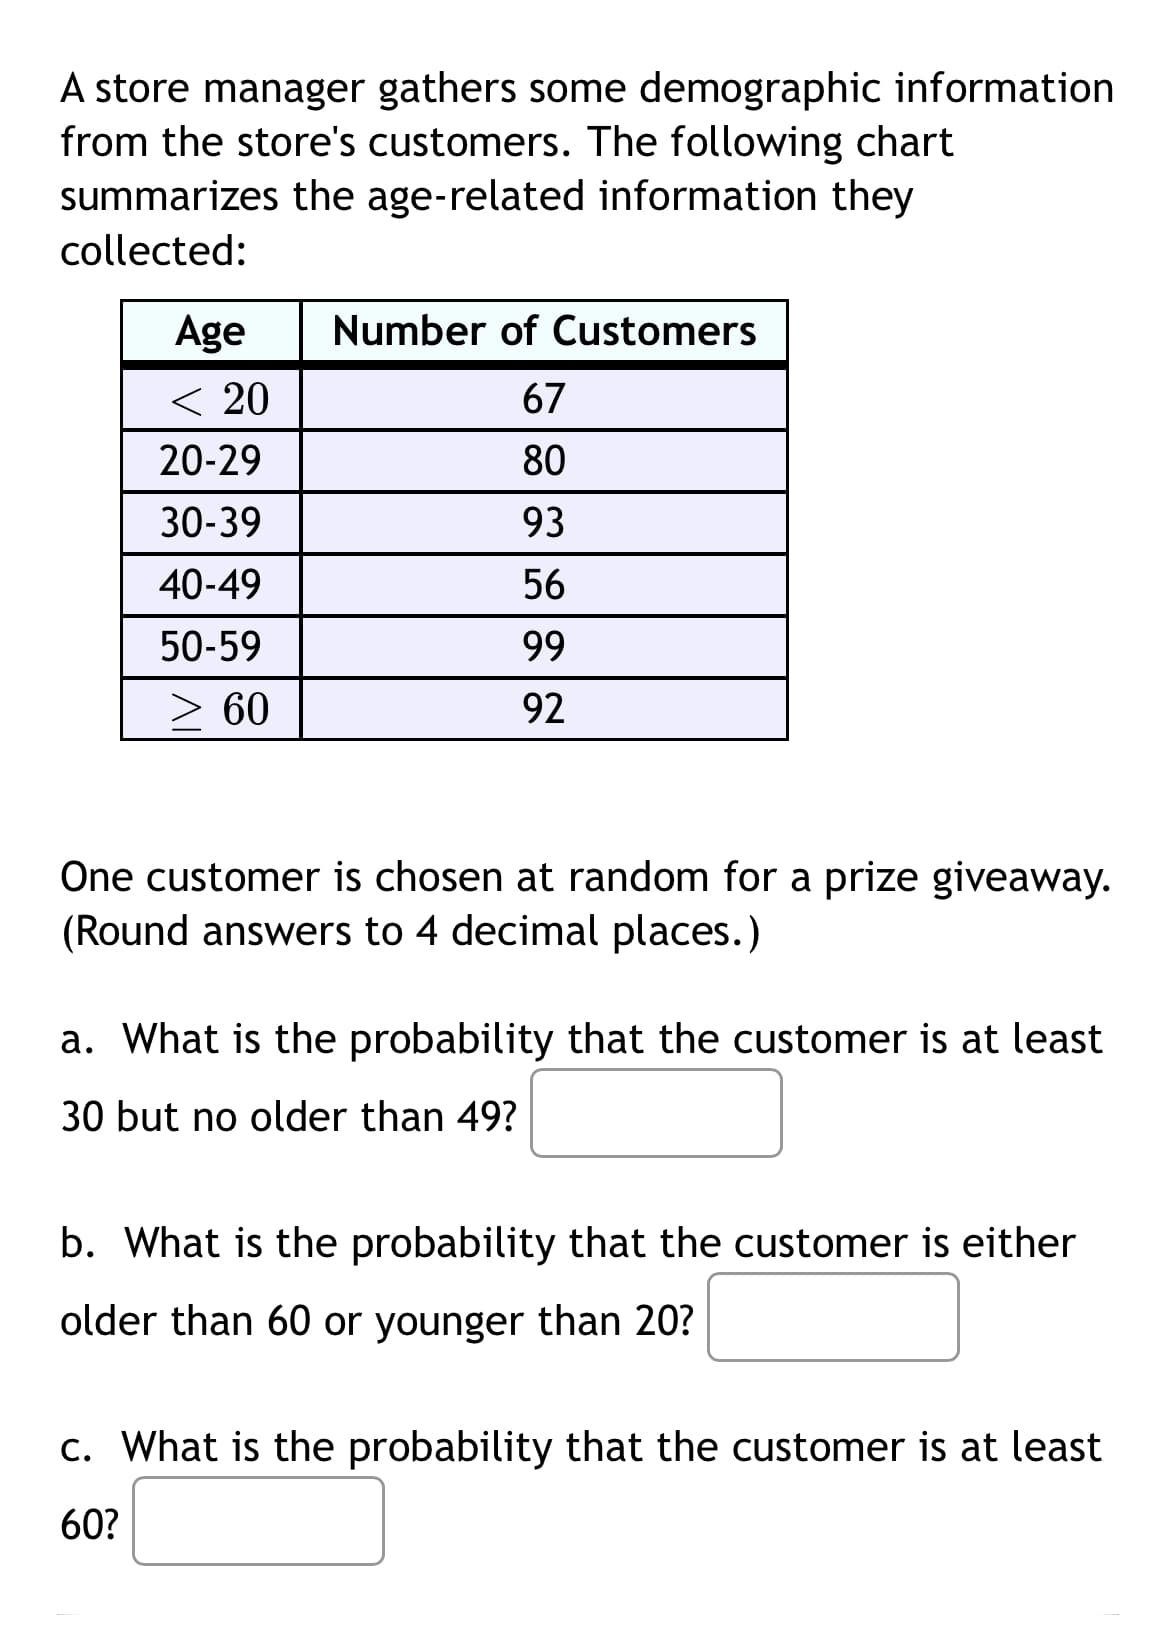 A store manager gathers some demographic information
from the store's customers. The following chart
summarizes the age-related information they
collected:
Age
Number of Customers
< 20
67
20-29
80
30-39
93
40-49
56
50-59
99
> 60
92
One customer is chosen at random for a prize giveaway.
(Round answers to 4 decimal places.)
a. What is the probability that the customer is at least
30 but no older than 49?
b. What is the probability that the customer is either
older than 60 or younger than 20?
c. What is the probability that the customer is at least
60?
